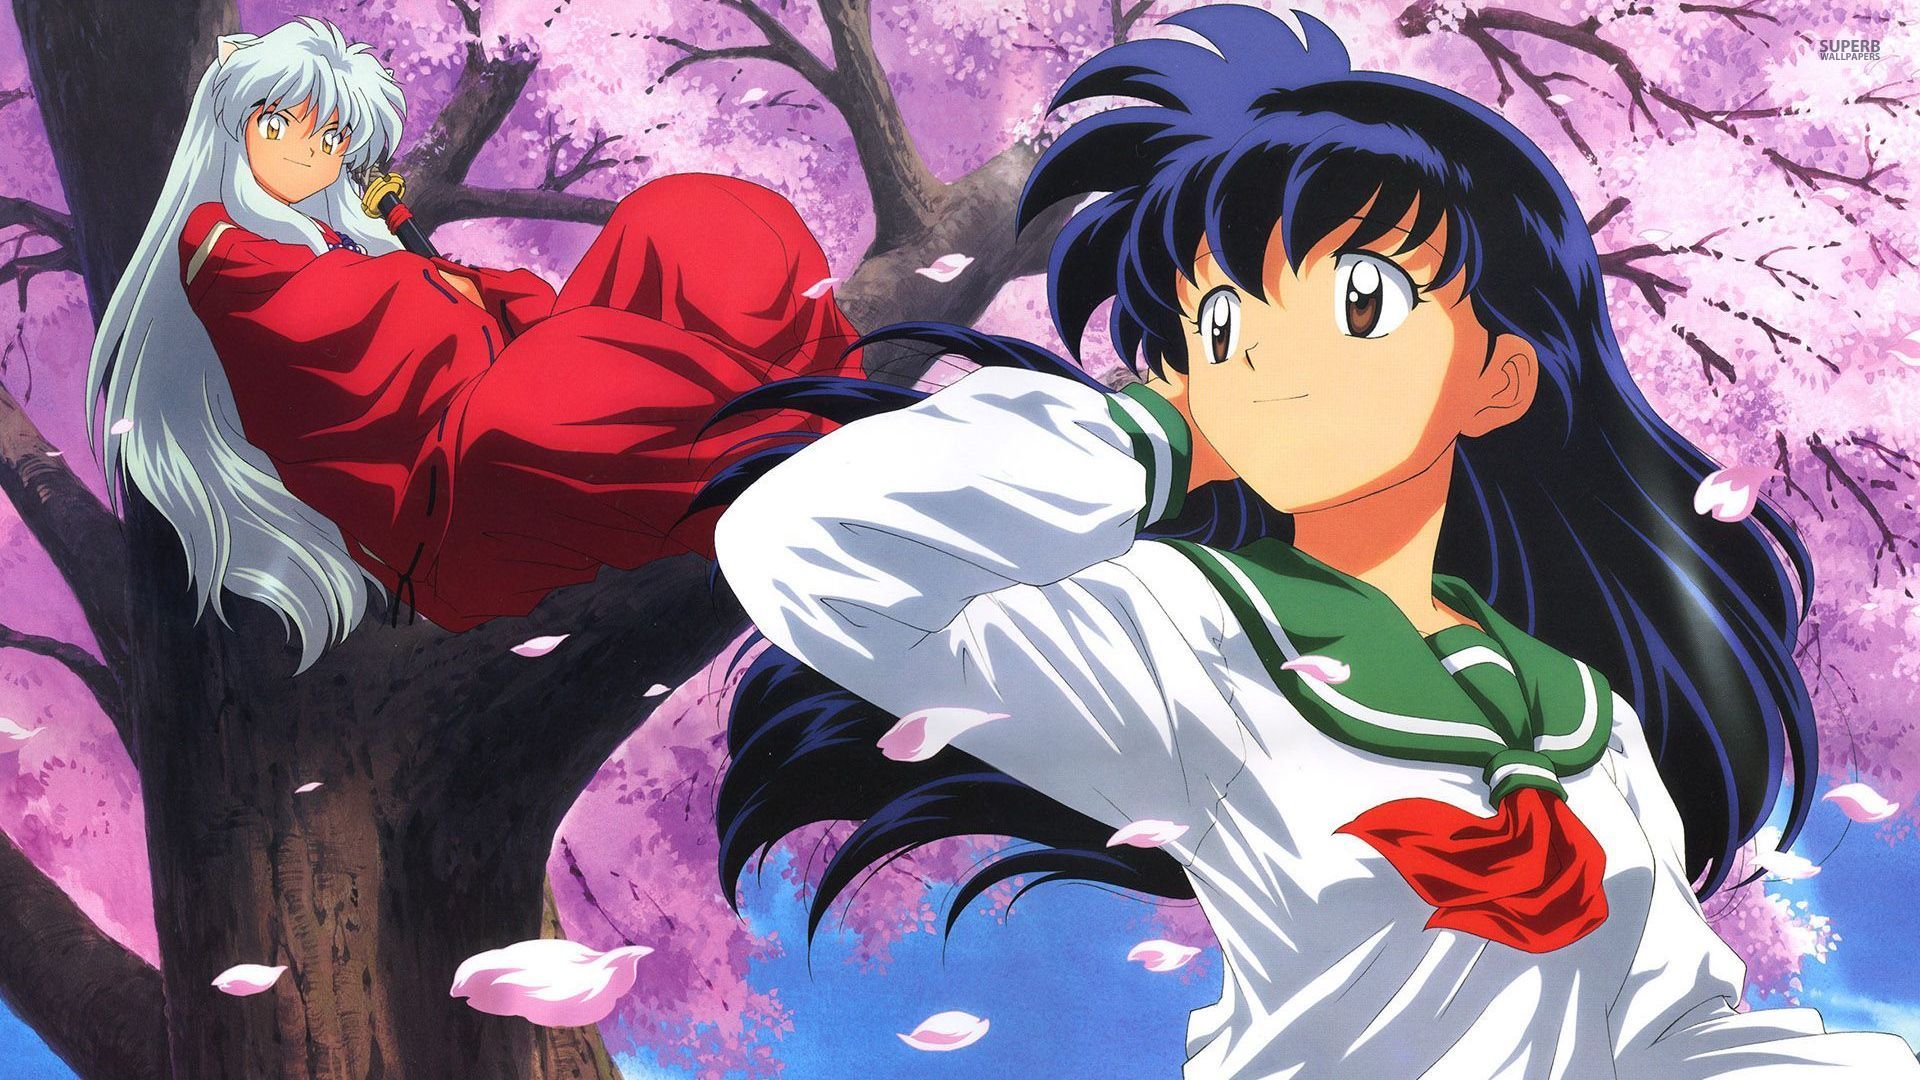 Inuyasha Wallpaper Movie Search Engine At